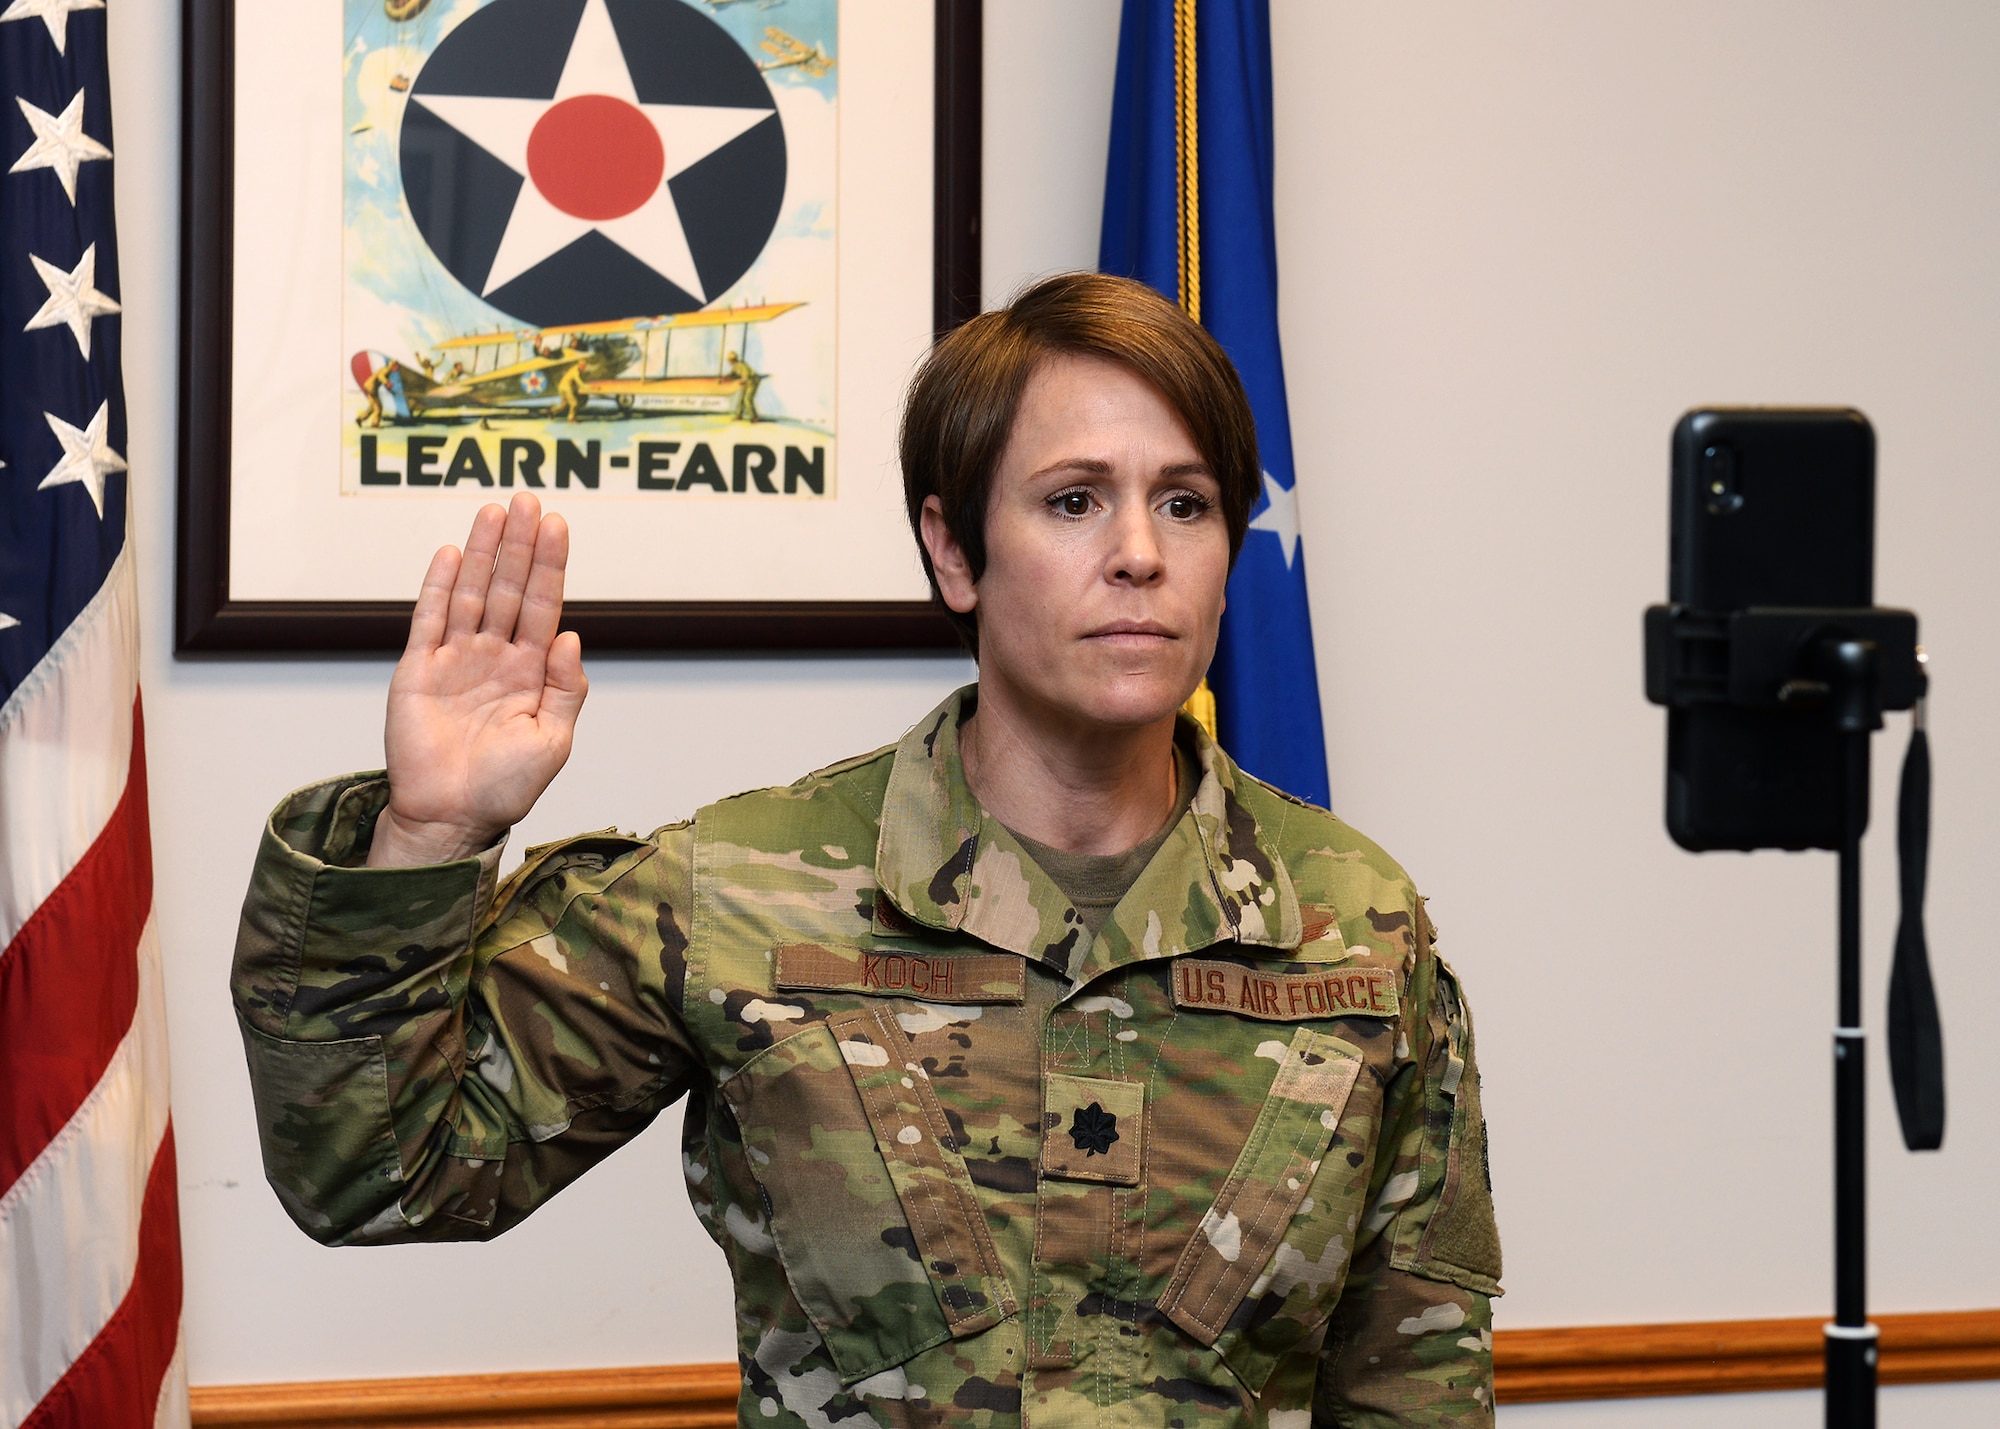 close up photograph of female lieutenant colonel in uniform with U.S. and Air Force flags behind her. Her right hand is raised as she stands in front of cell phone and verbally administers the oath of enlistment